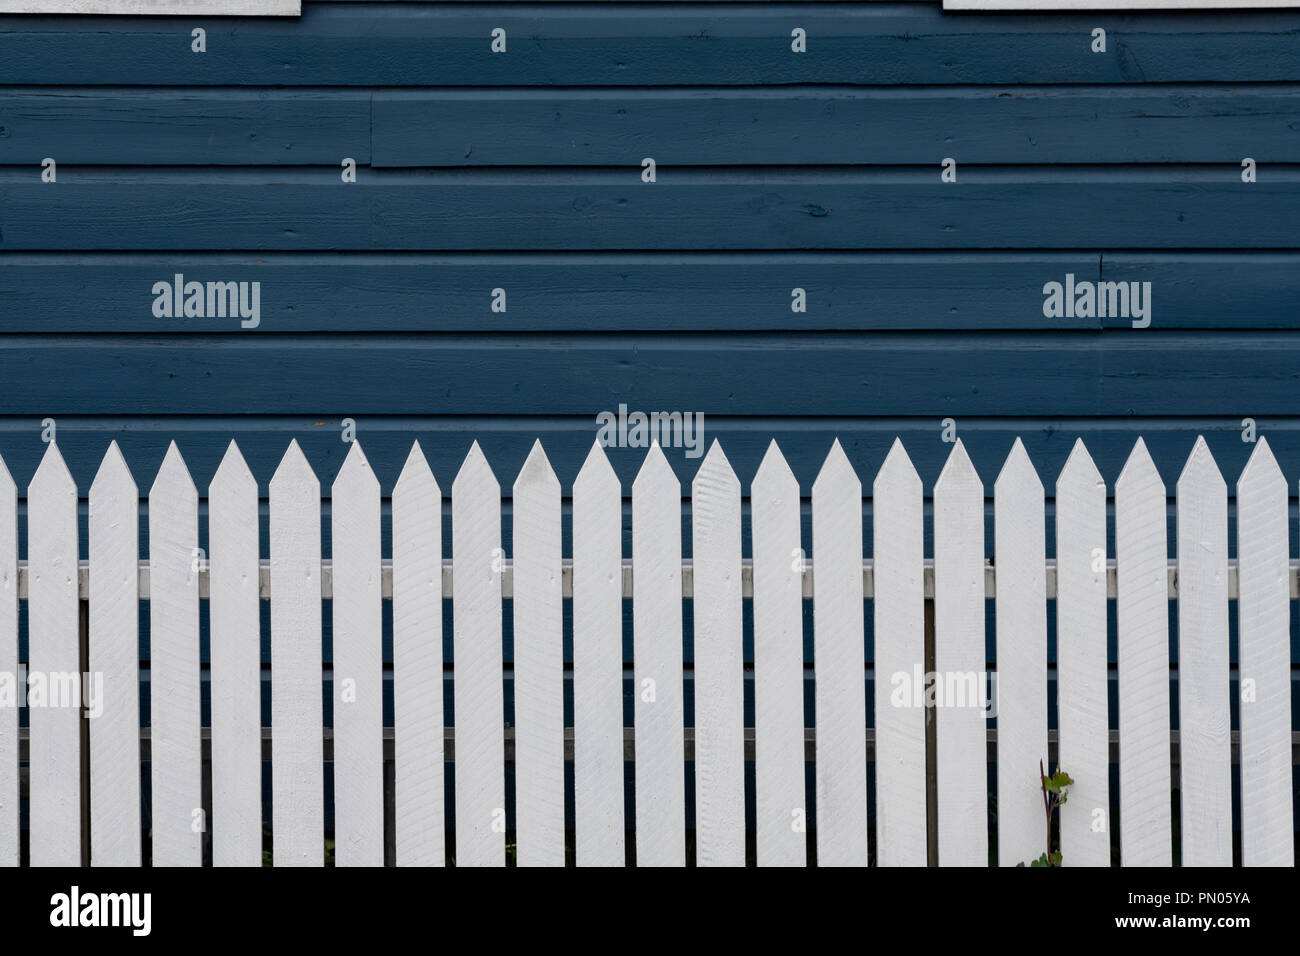 White picket fence in front of rick blue painted weather boarded house. Useful as a background image Stock Photo